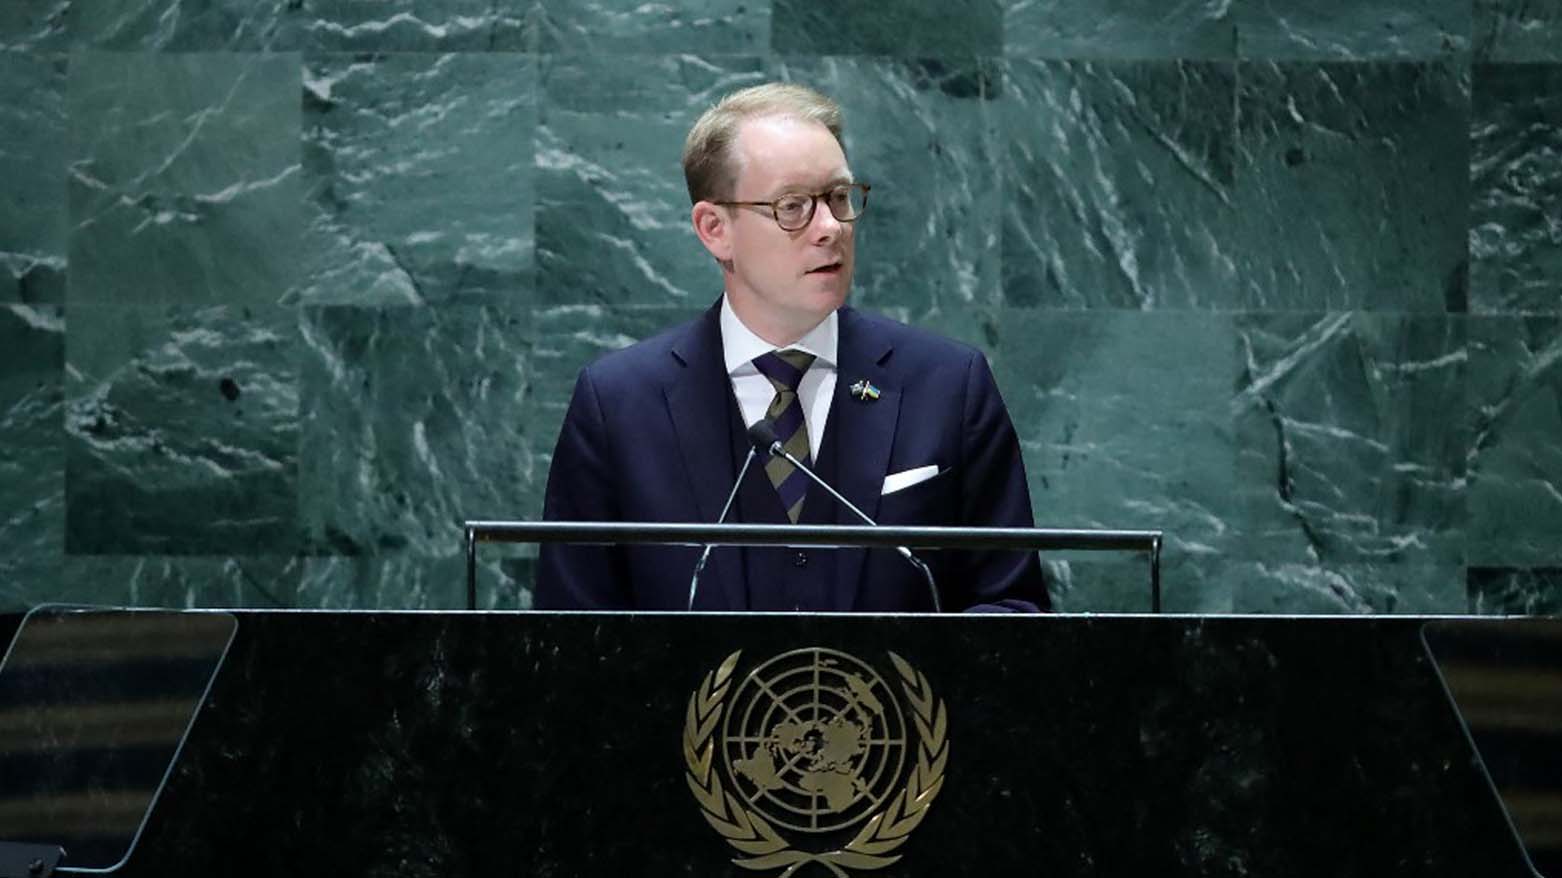 Sweden's Foreign Minister Tobias Billstrom addresses the 78th United Nations General Assembly at UN headquarters in New York City, Sept. 22, 2023. (Photo: Leonardo Munoz/AFP